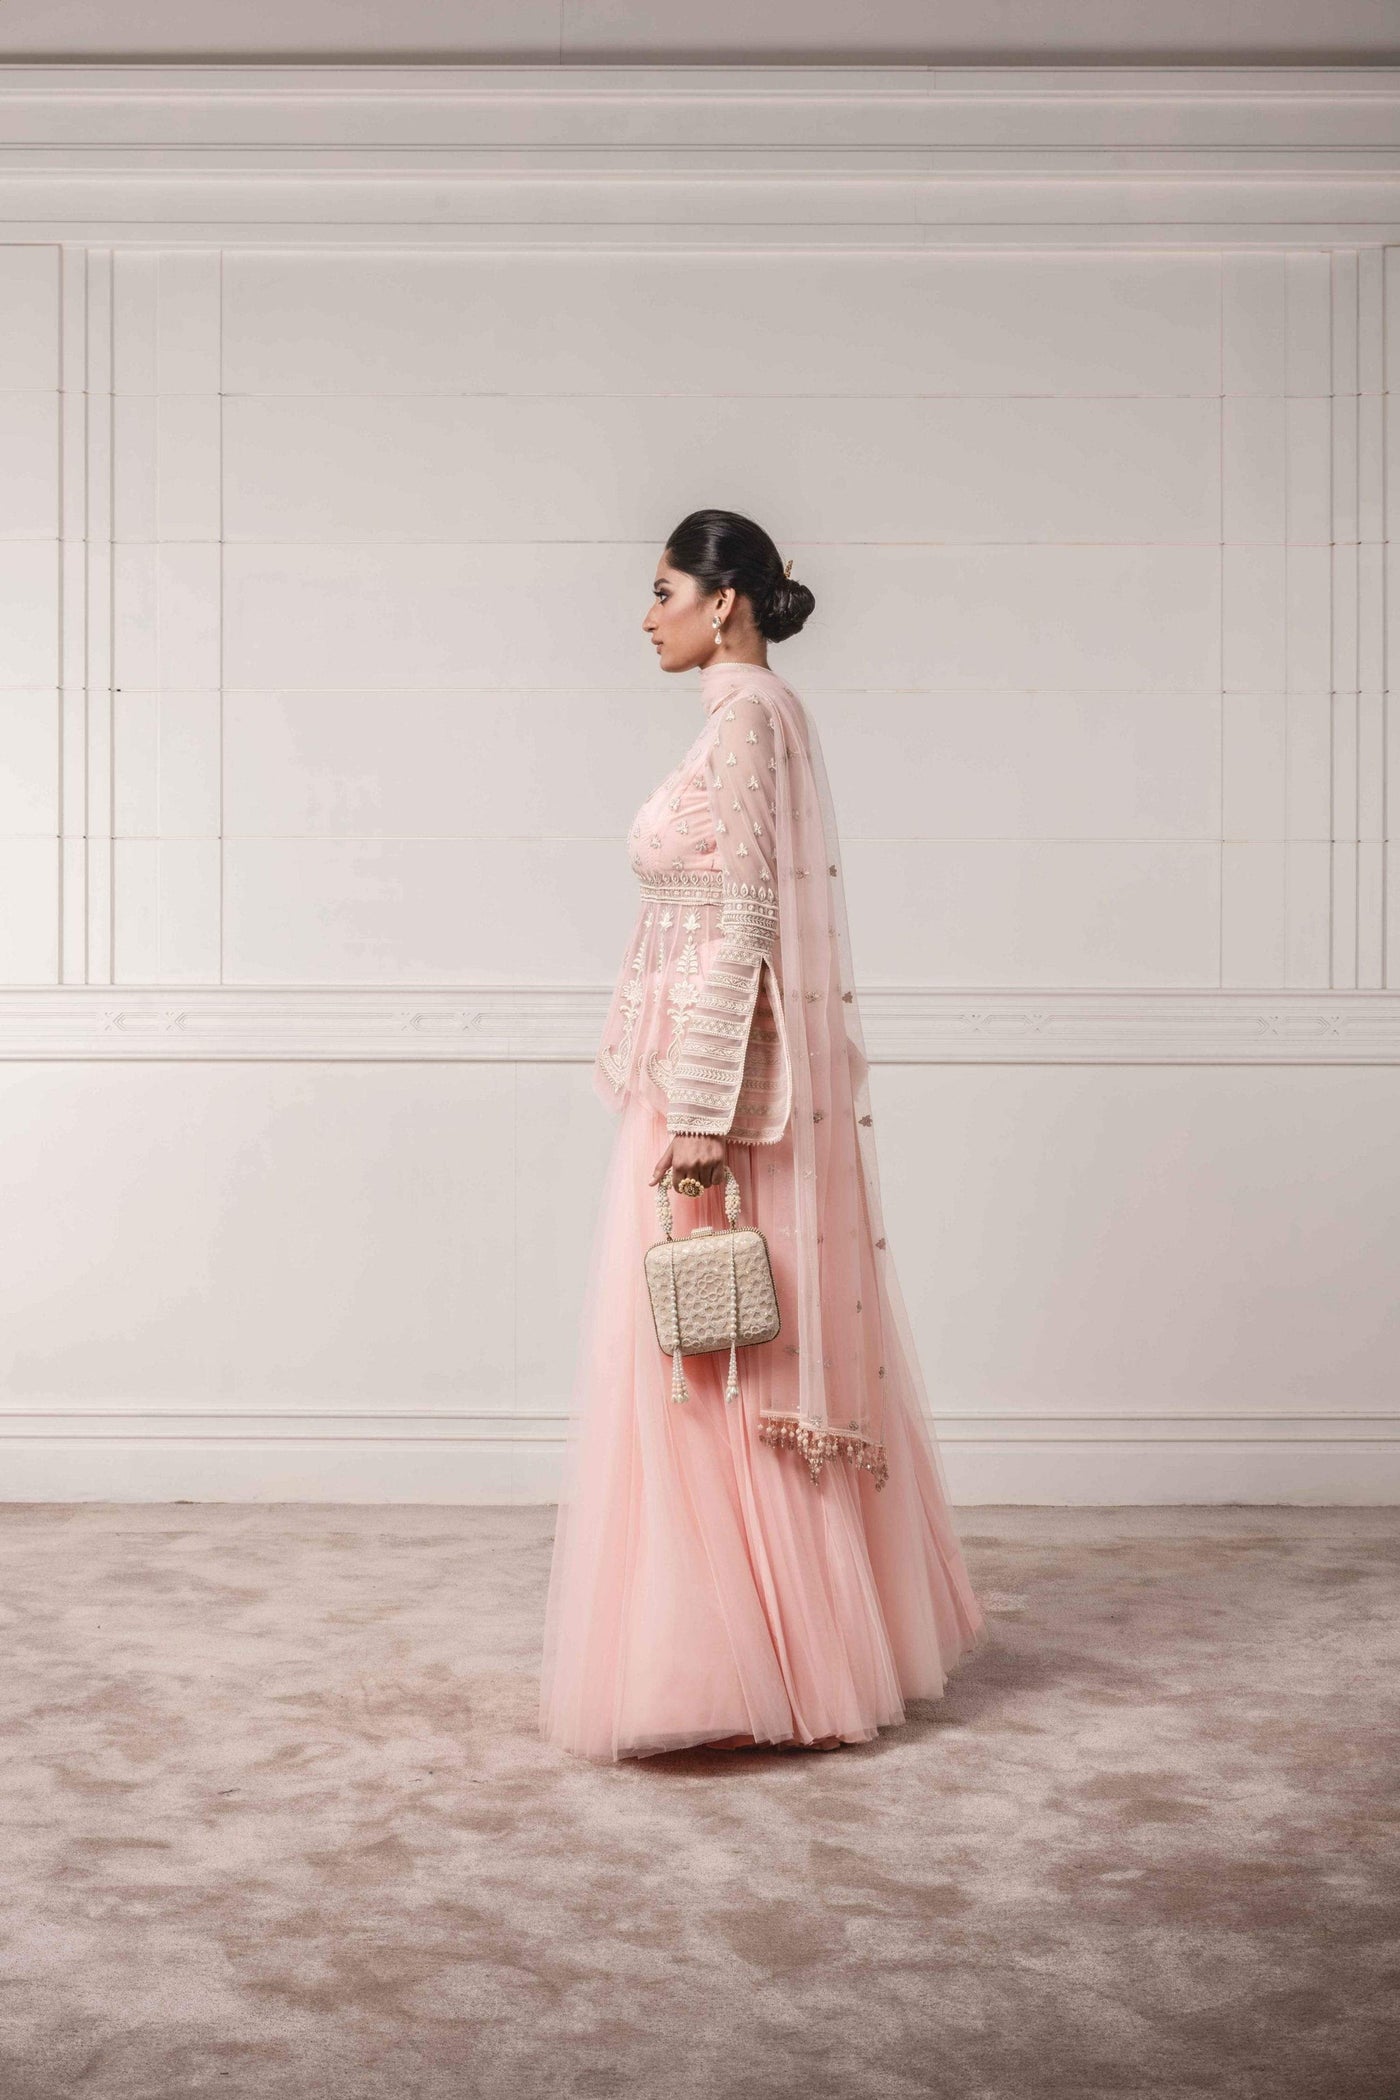 Blush Embellished Lehenga set - Indian Clothing in Denver, CO, Aurora, CO, Boulder, CO, Fort Collins, CO, Colorado Springs, CO, Parker, CO, Highlands Ranch, CO, Cherry Creek, CO, Centennial, CO, and Longmont, CO. Nationwide shipping USA - India Fashion X